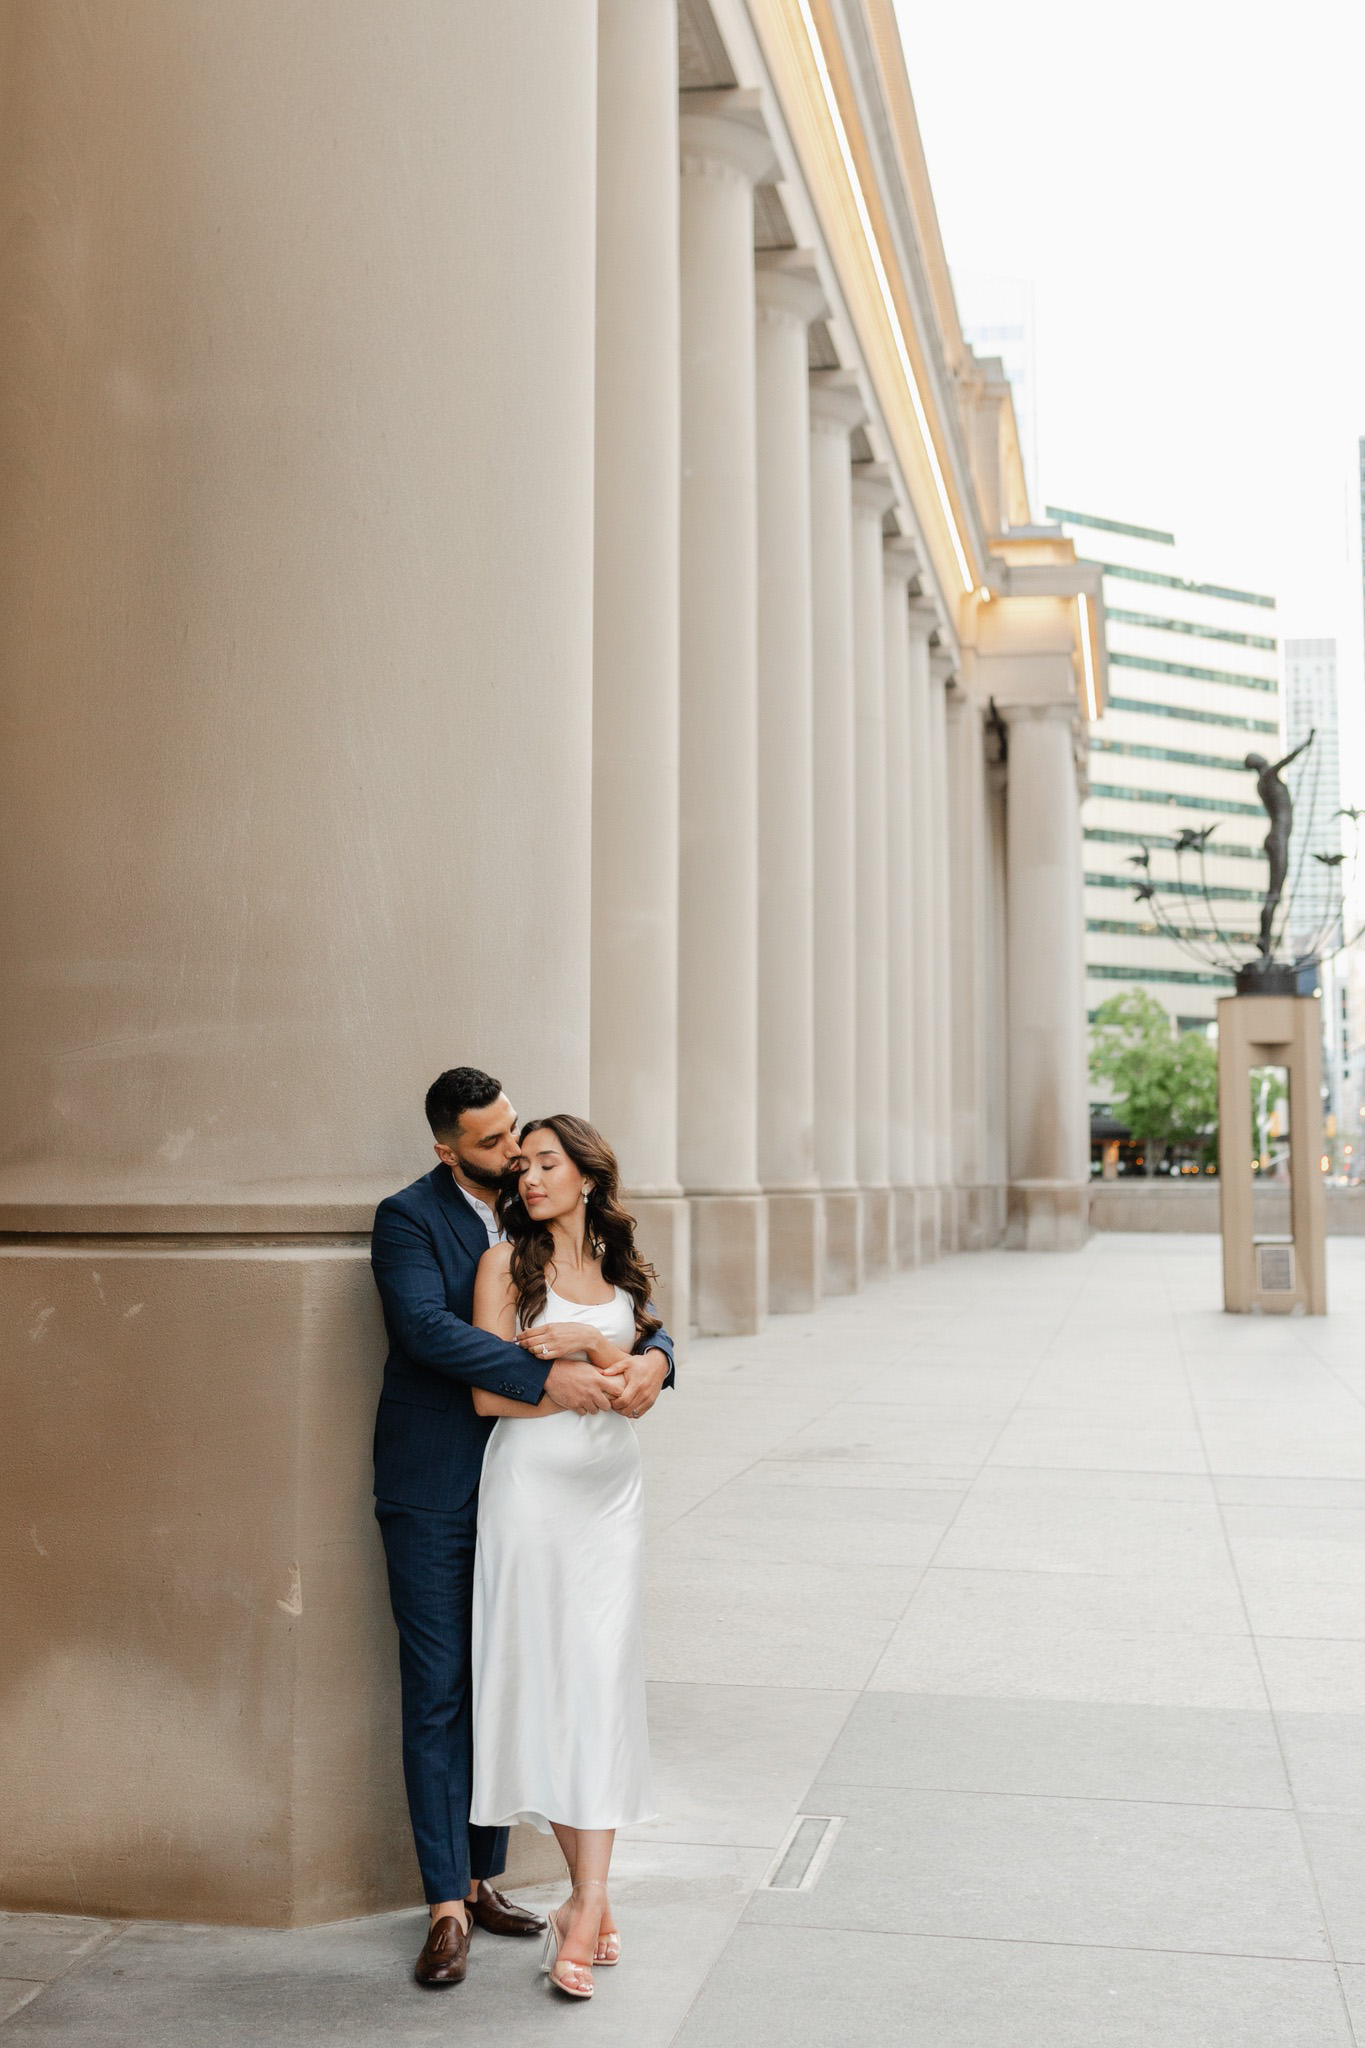 A Modern Styled Engagement Shoot In Downtown Toronto